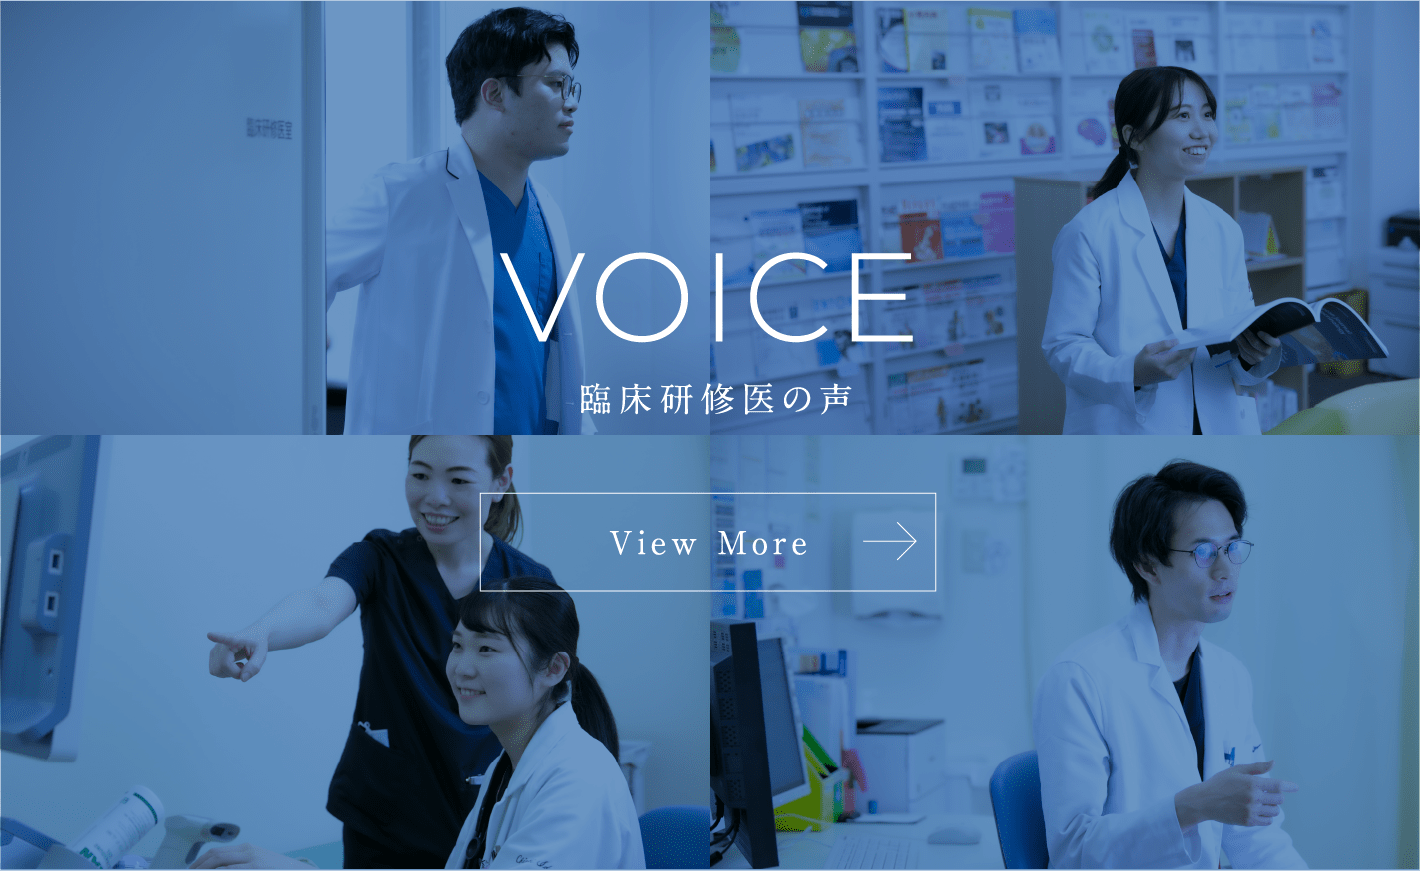 VOICE 臨床研修医の声 View More